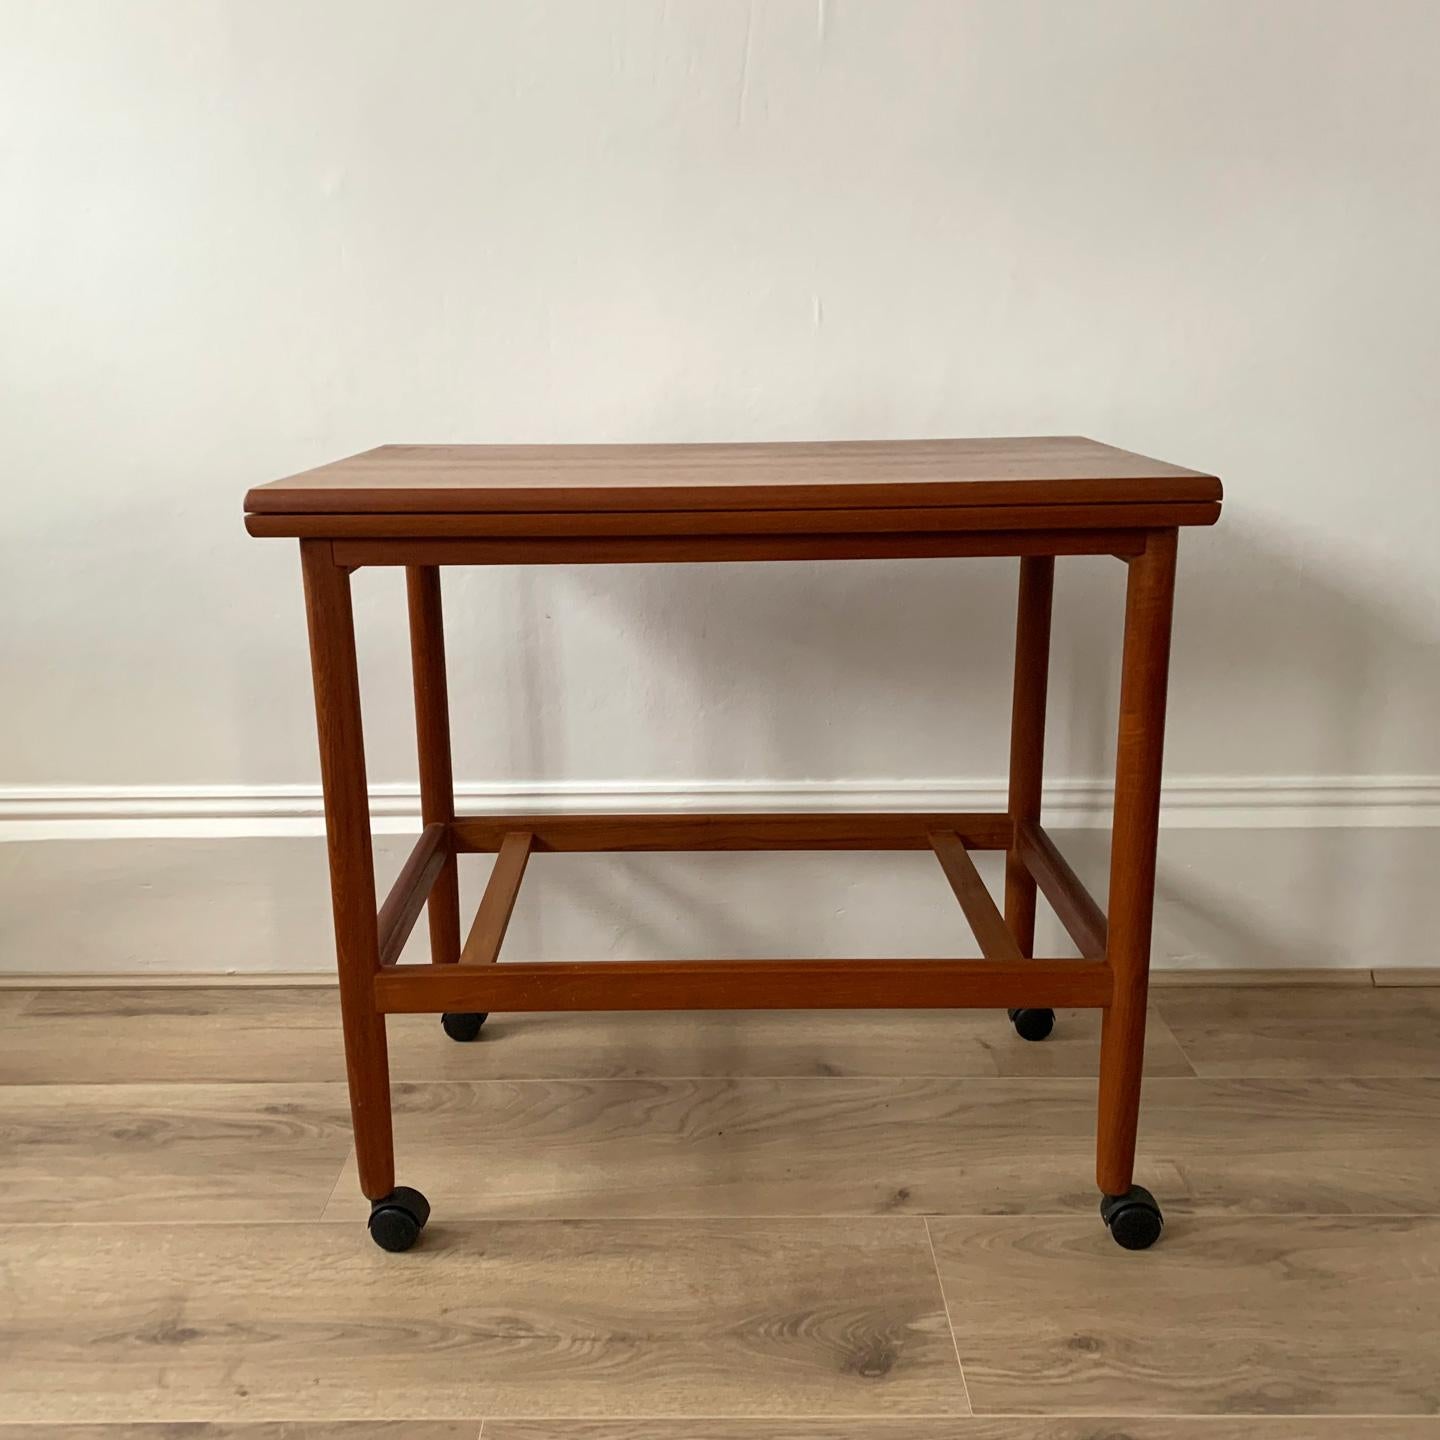 Arrebo mobler danish modern table. Danish teak serving trolley with folding top by arrebo mobler, 1960s features a convertible folding tabletop which measures: Table top folded out: 88 cm X 70 cm. Measures: Height: 64 cm, width: 70 cm, depth: 44 cm.